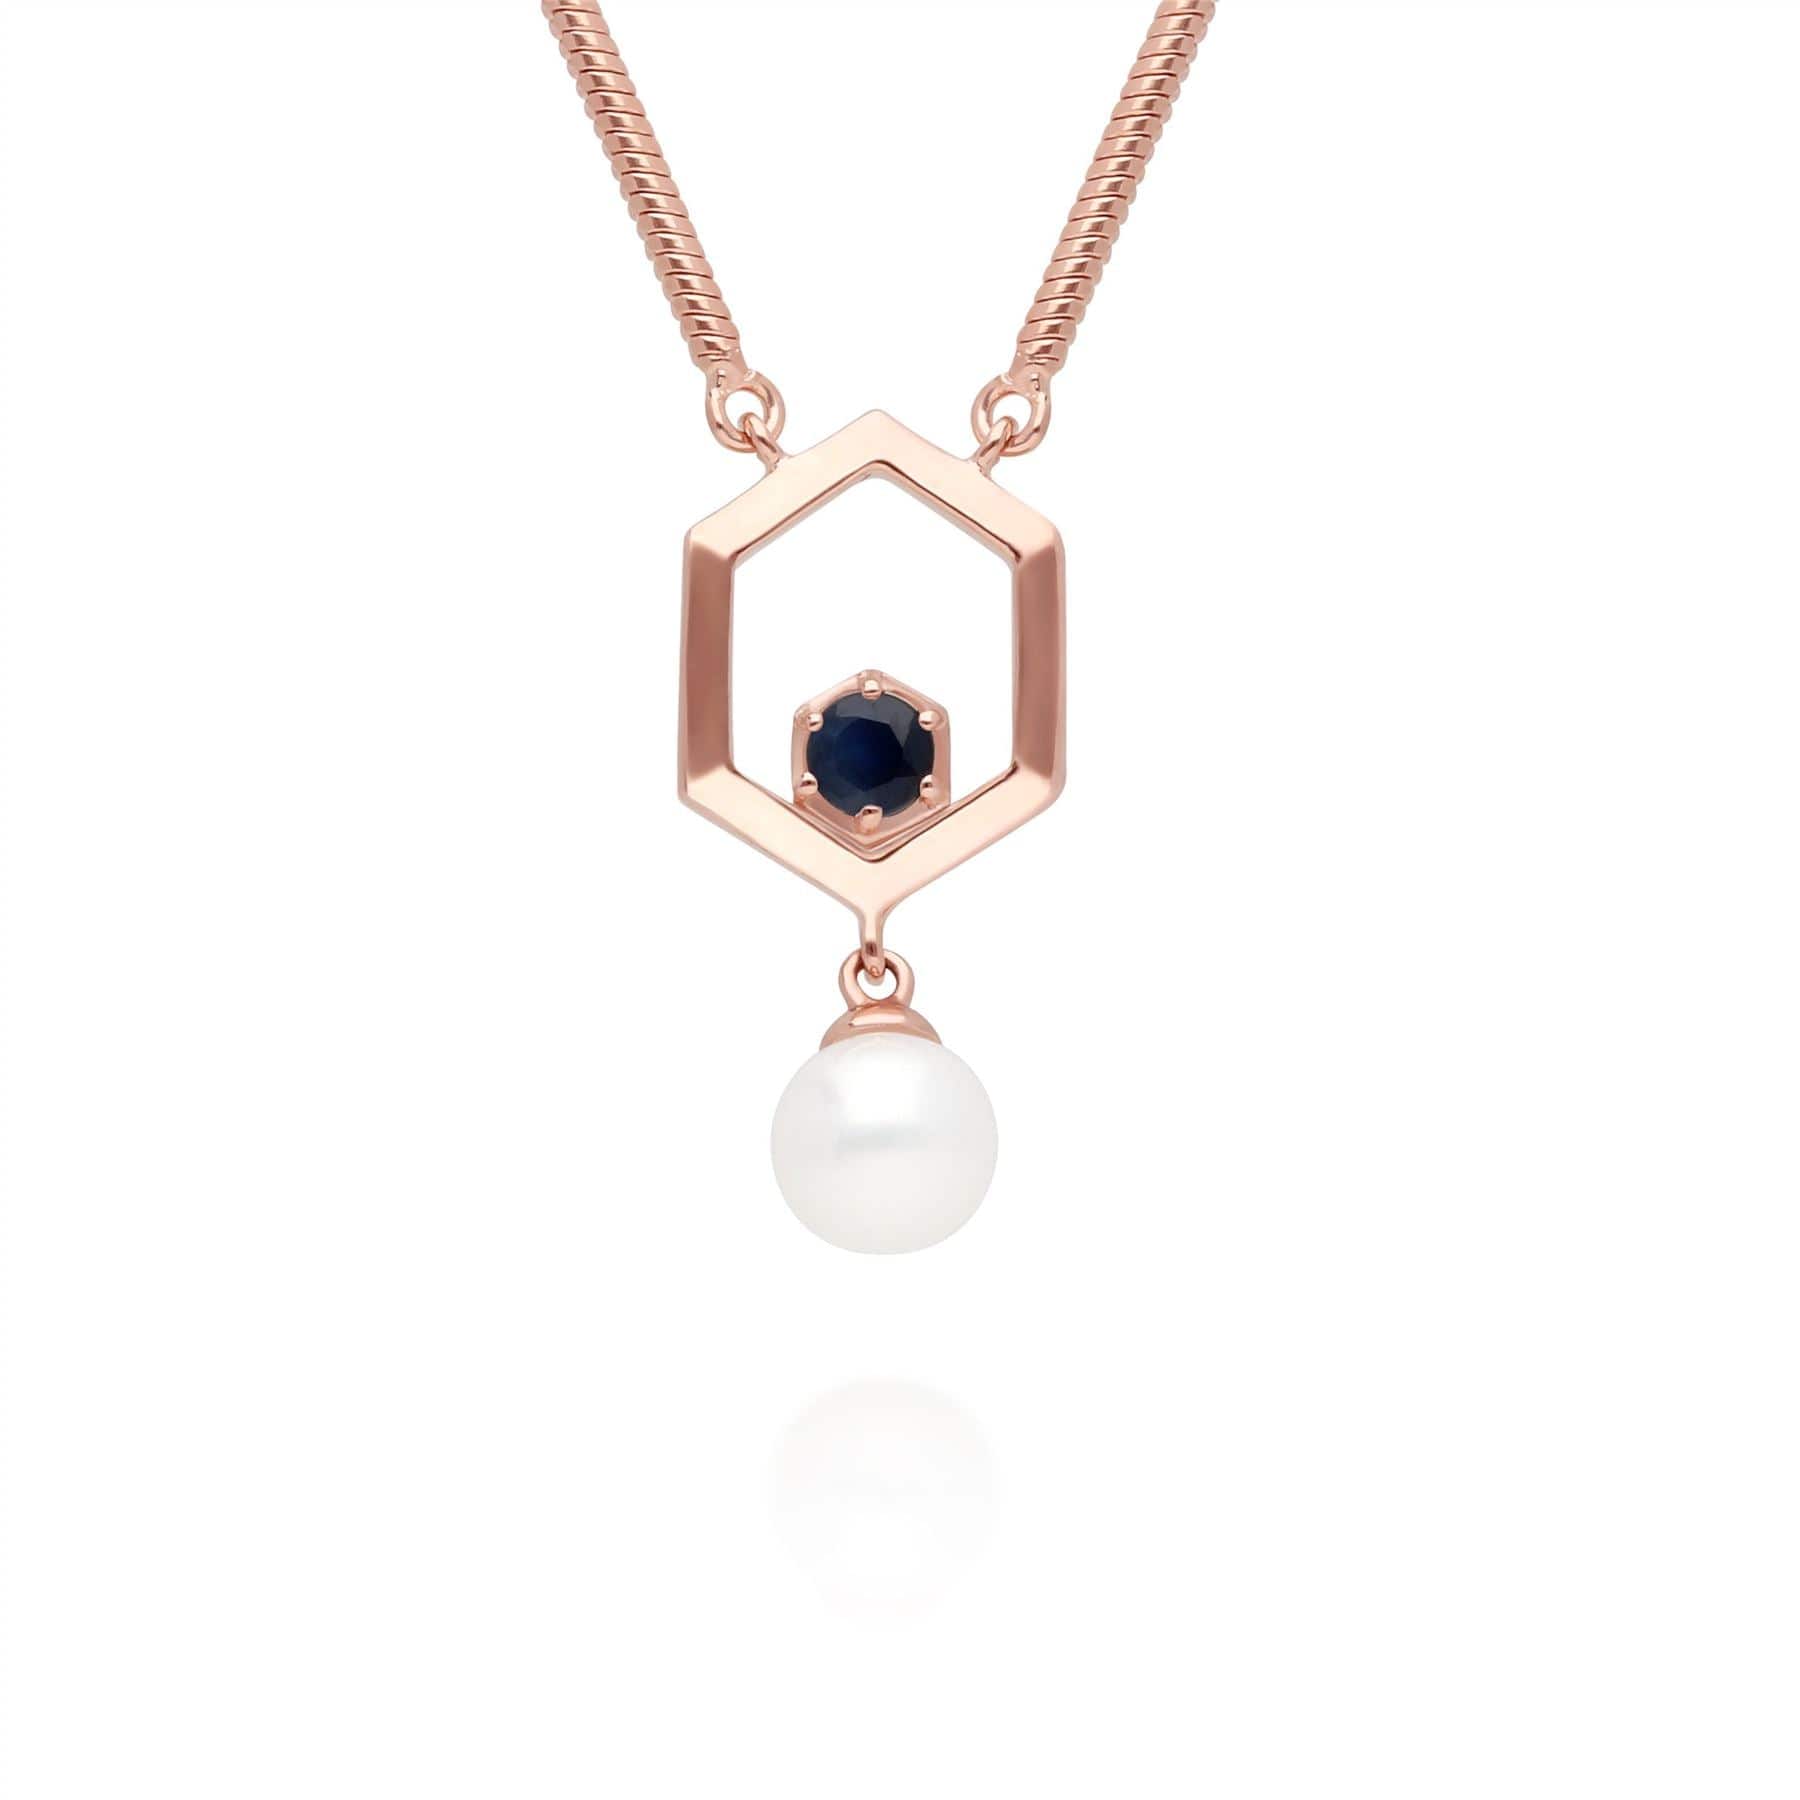 Photos - Pendant / Choker Necklace Modern Pearl & Sapphire Hexagon Drop Necklace in Rose gold Plated Silver